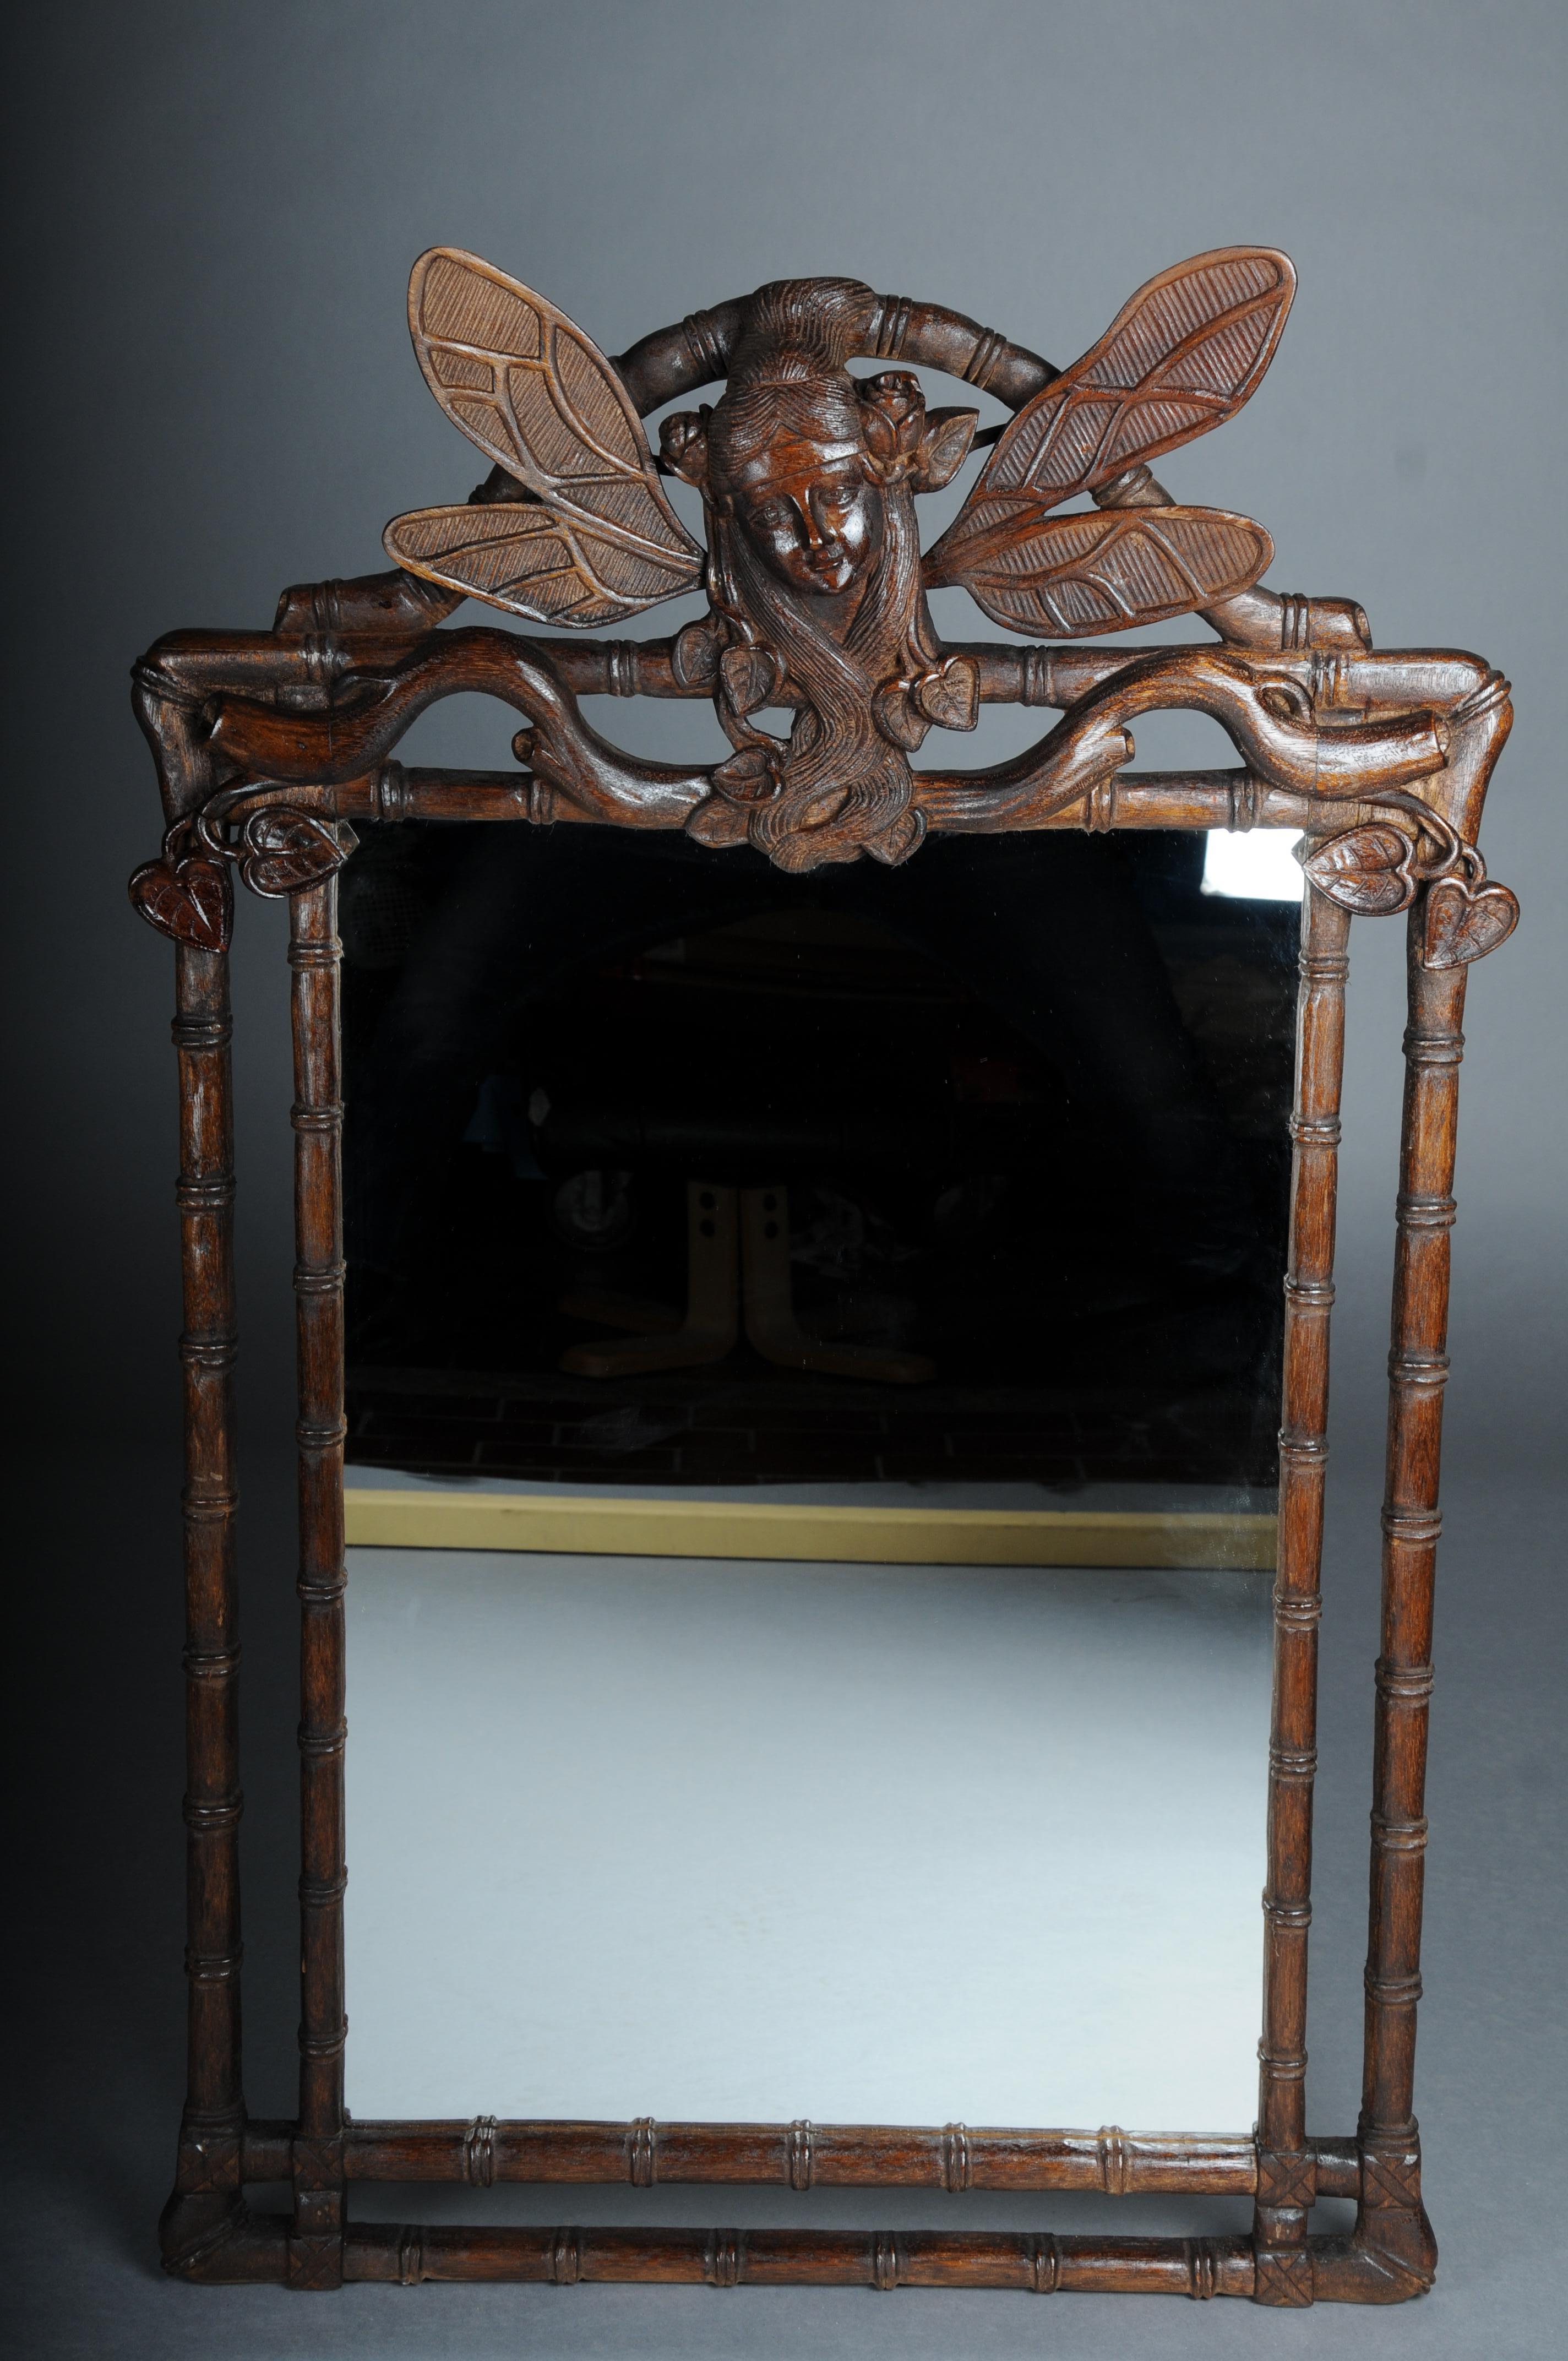 20th Century Impressive French Art Noveau Wall Mirror


Solid wood, finely carved and dark stained.
Branch-shaped frame. Mirror crowned with a winged fairy face.

Very decorative and elegant. A real eye-catcher in every home.